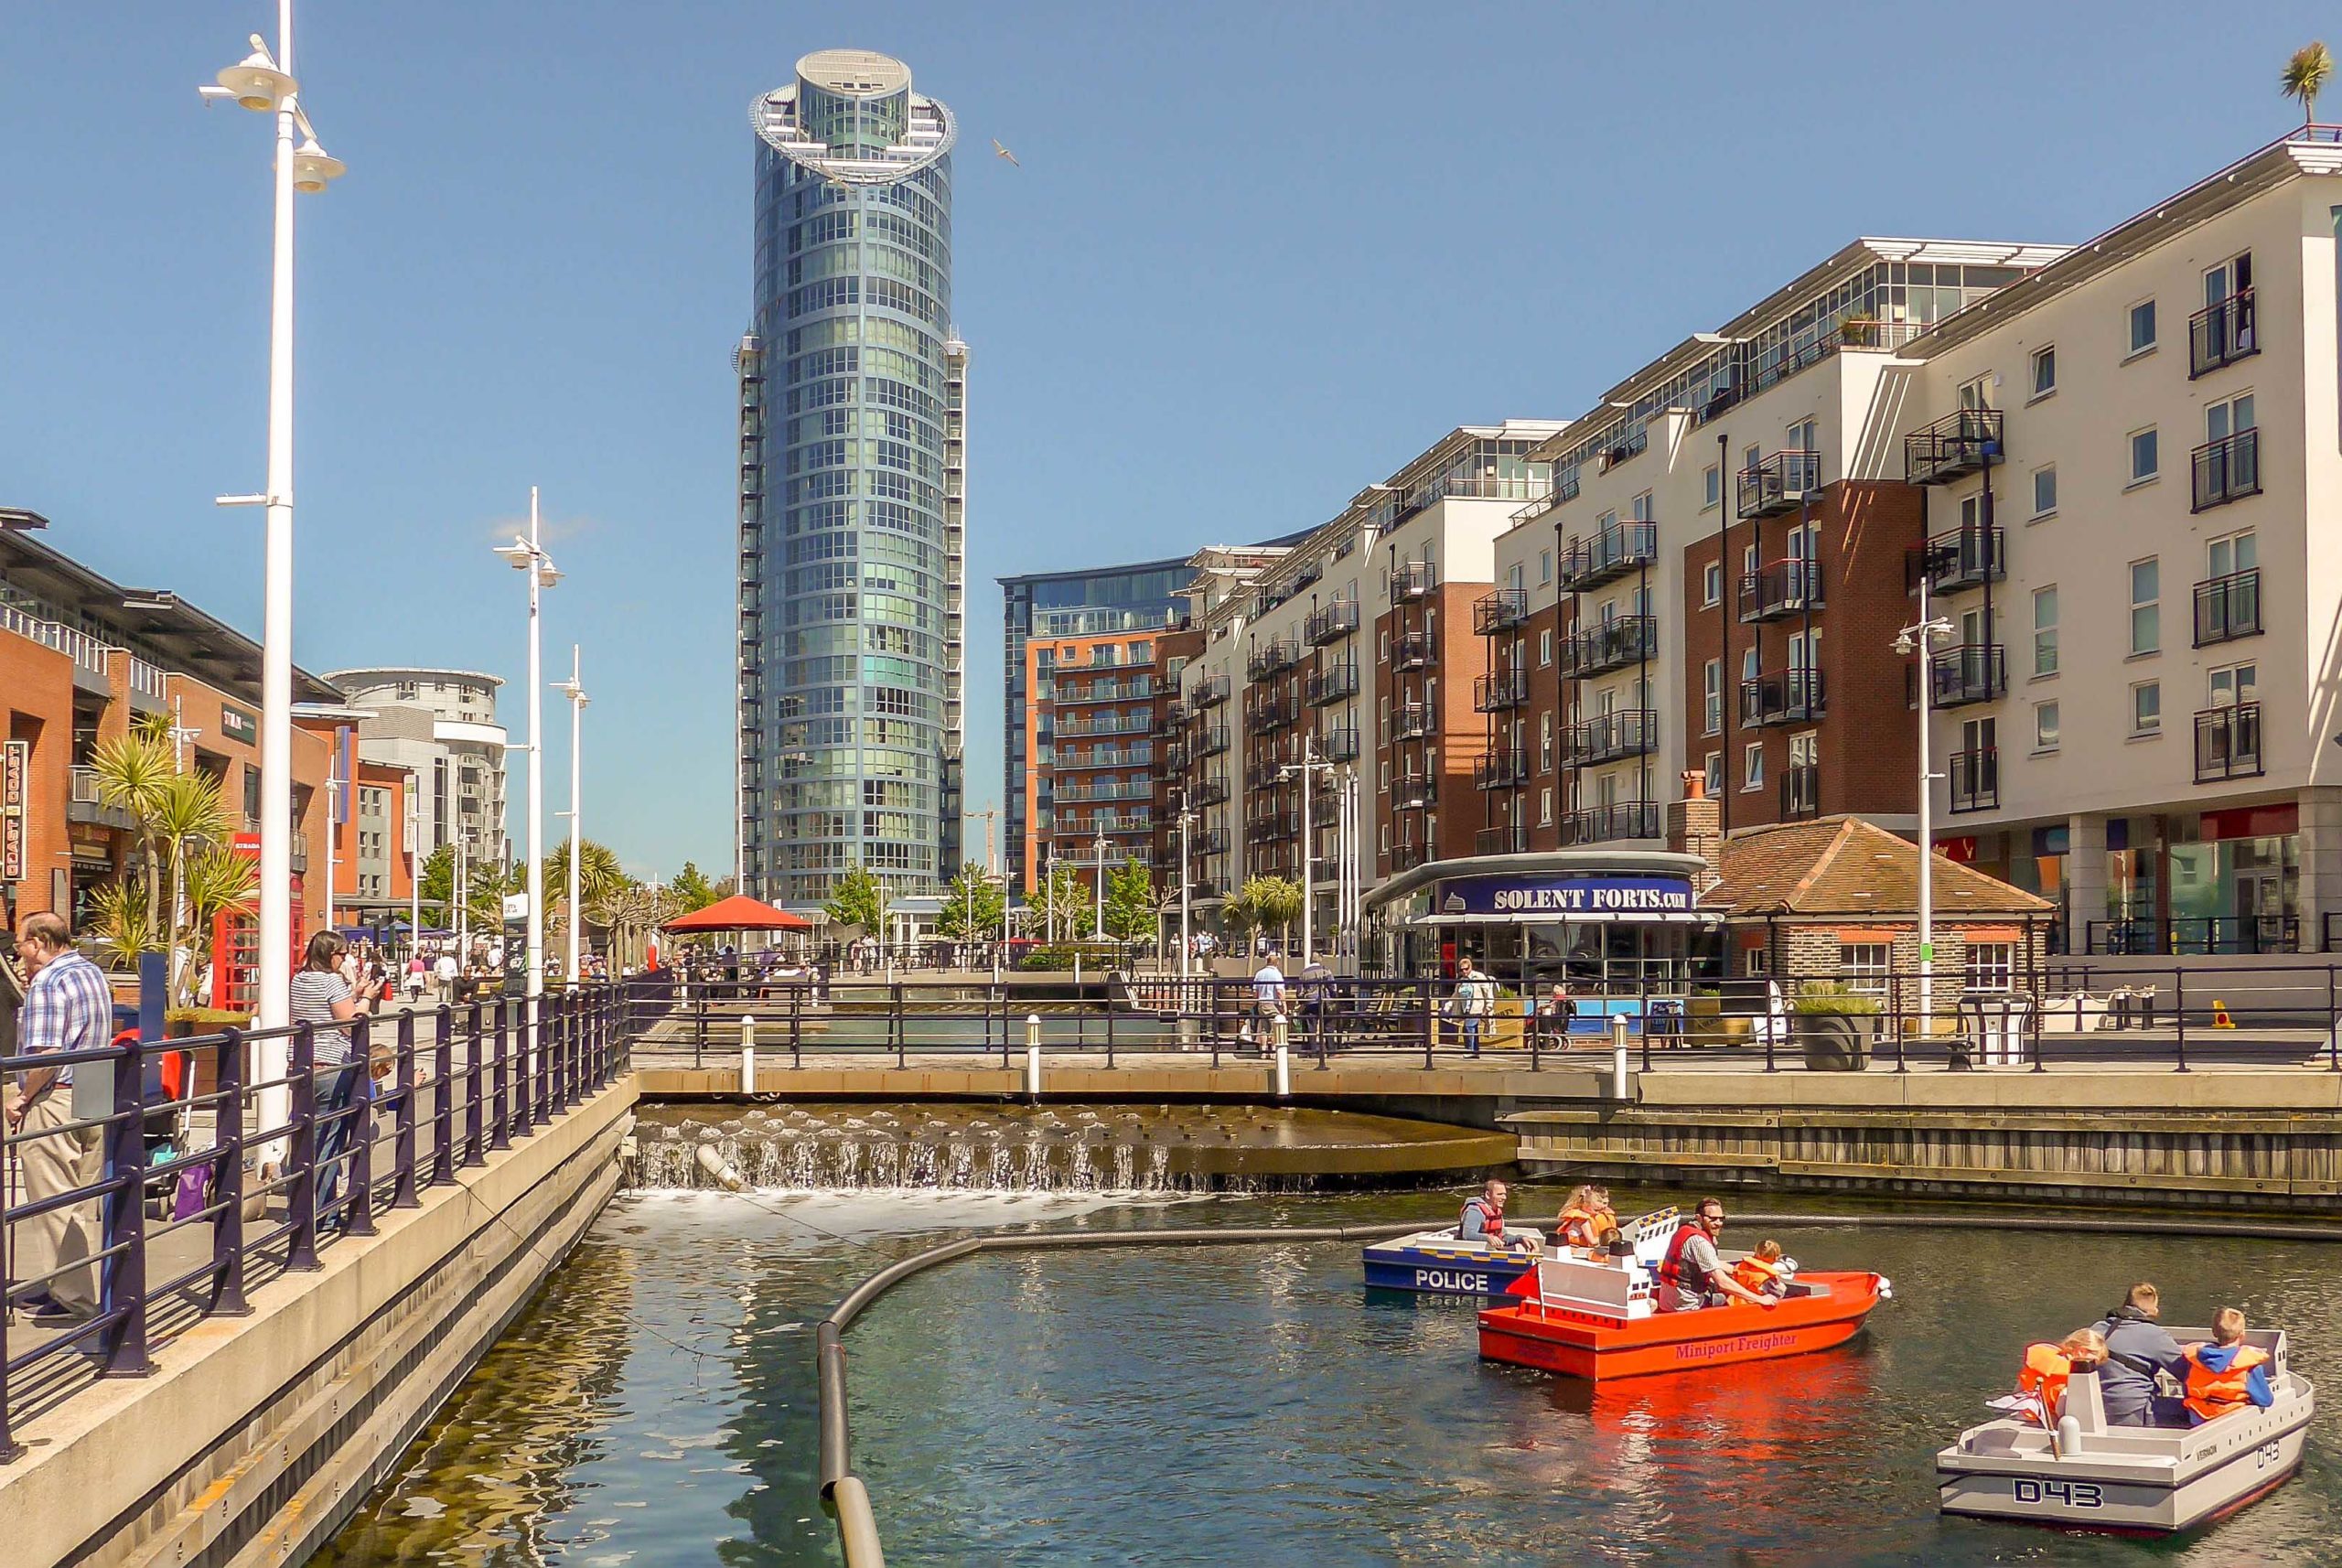 Gunwharf Quays © Wintonian - licence [CC BY-SA 4.0] from Wikimedia Commons